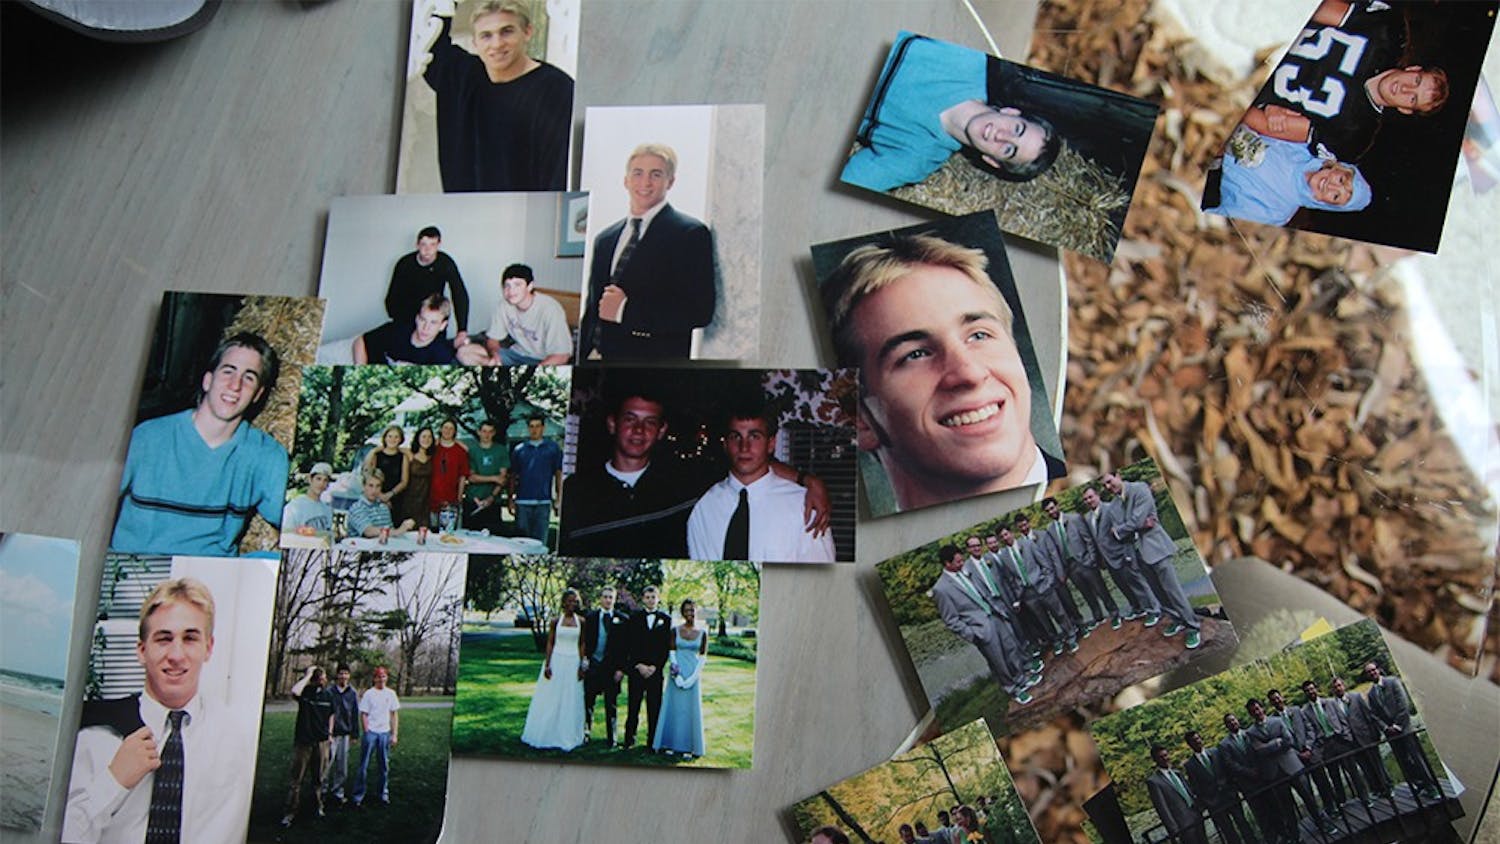 Photos of Caleb, from multiple years, are spread on the glass table in the front room.